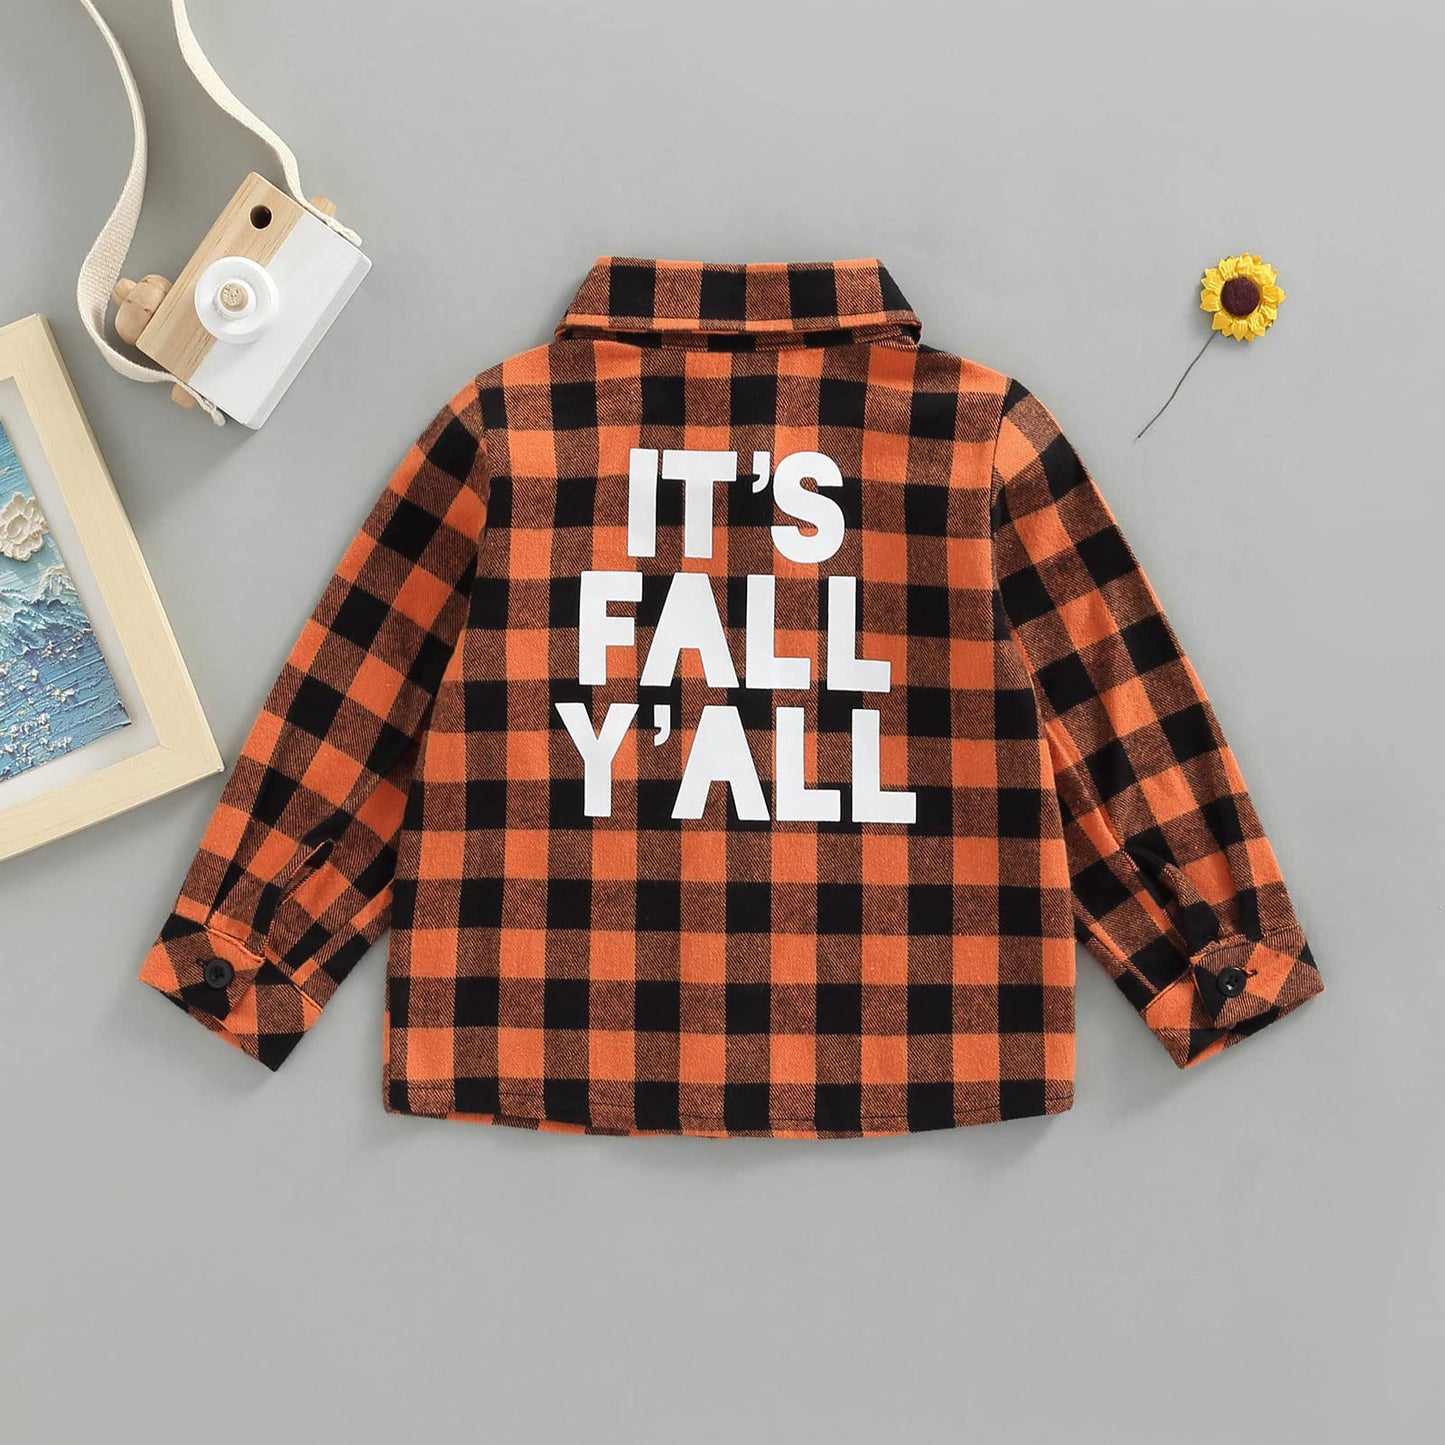 Toddler Baby Boy Cute Letter Button Down Long Sleeve Plaid Shirt Top Autumn Dressy Outfits